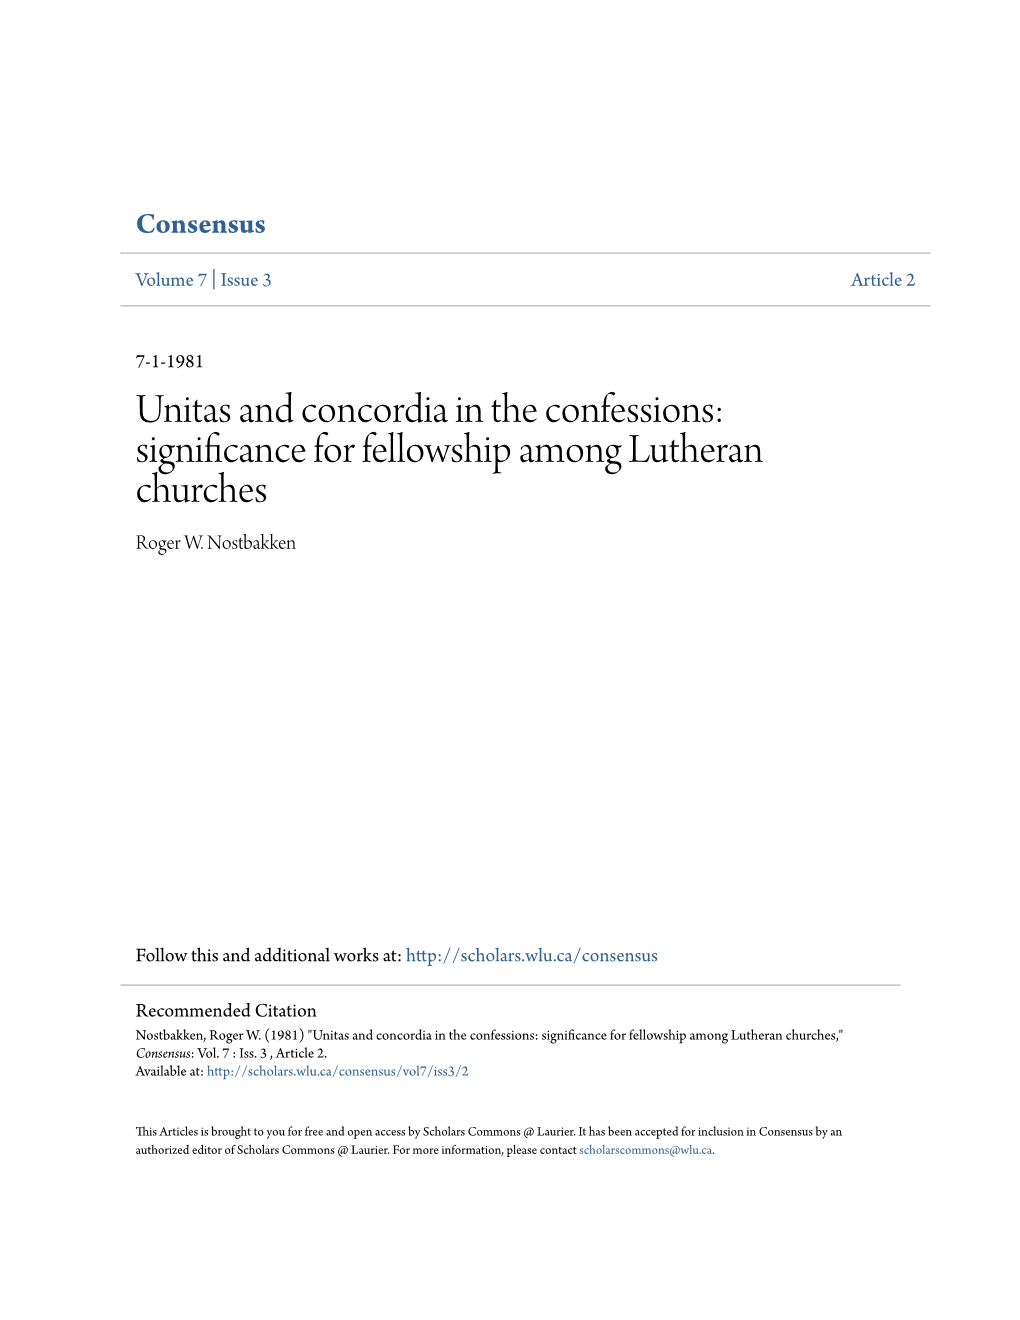 Unitas and Concordia in the Confessions: Significance for Fellowship Among Lutheran Churches Roger W